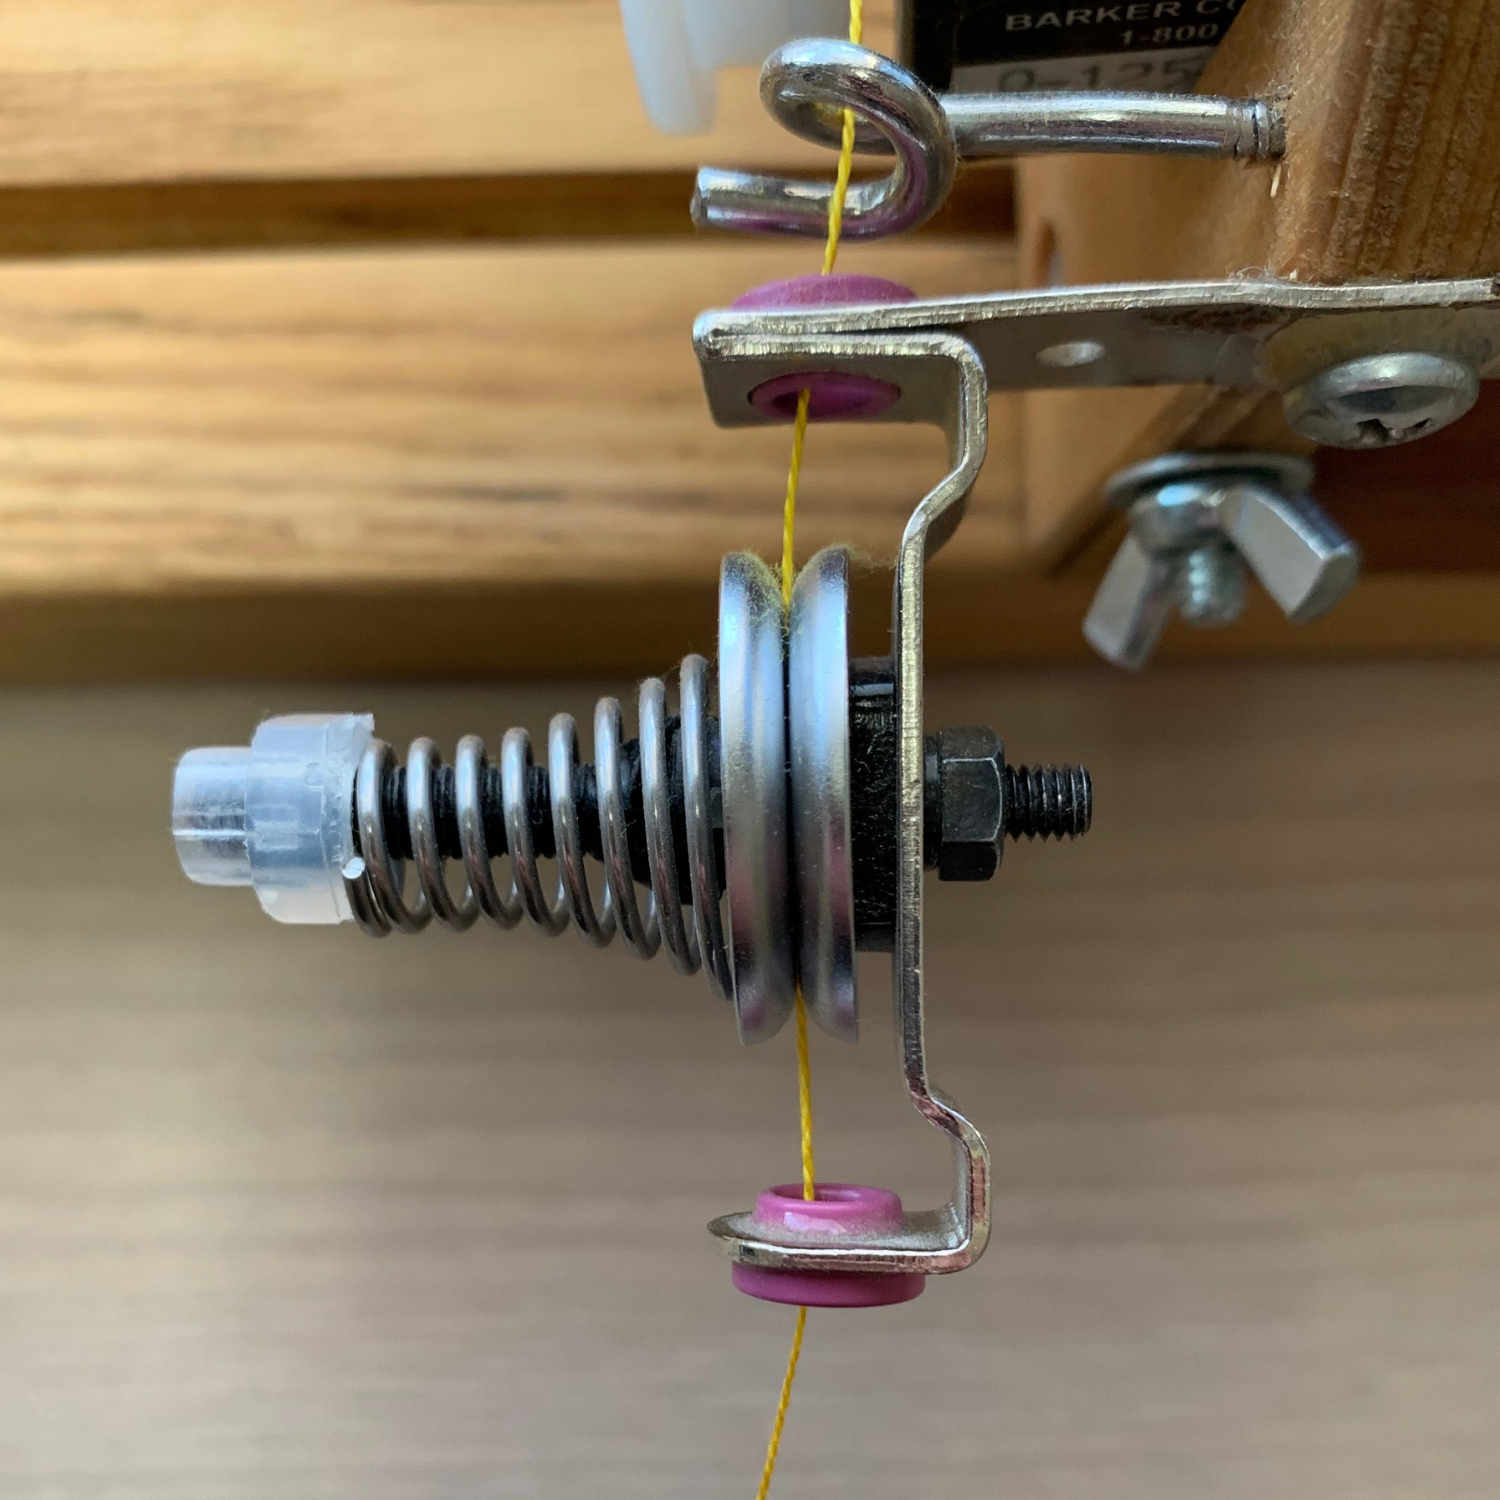 A DIY electric weaving bobbin winder – Act 2 – Double Ended Winder